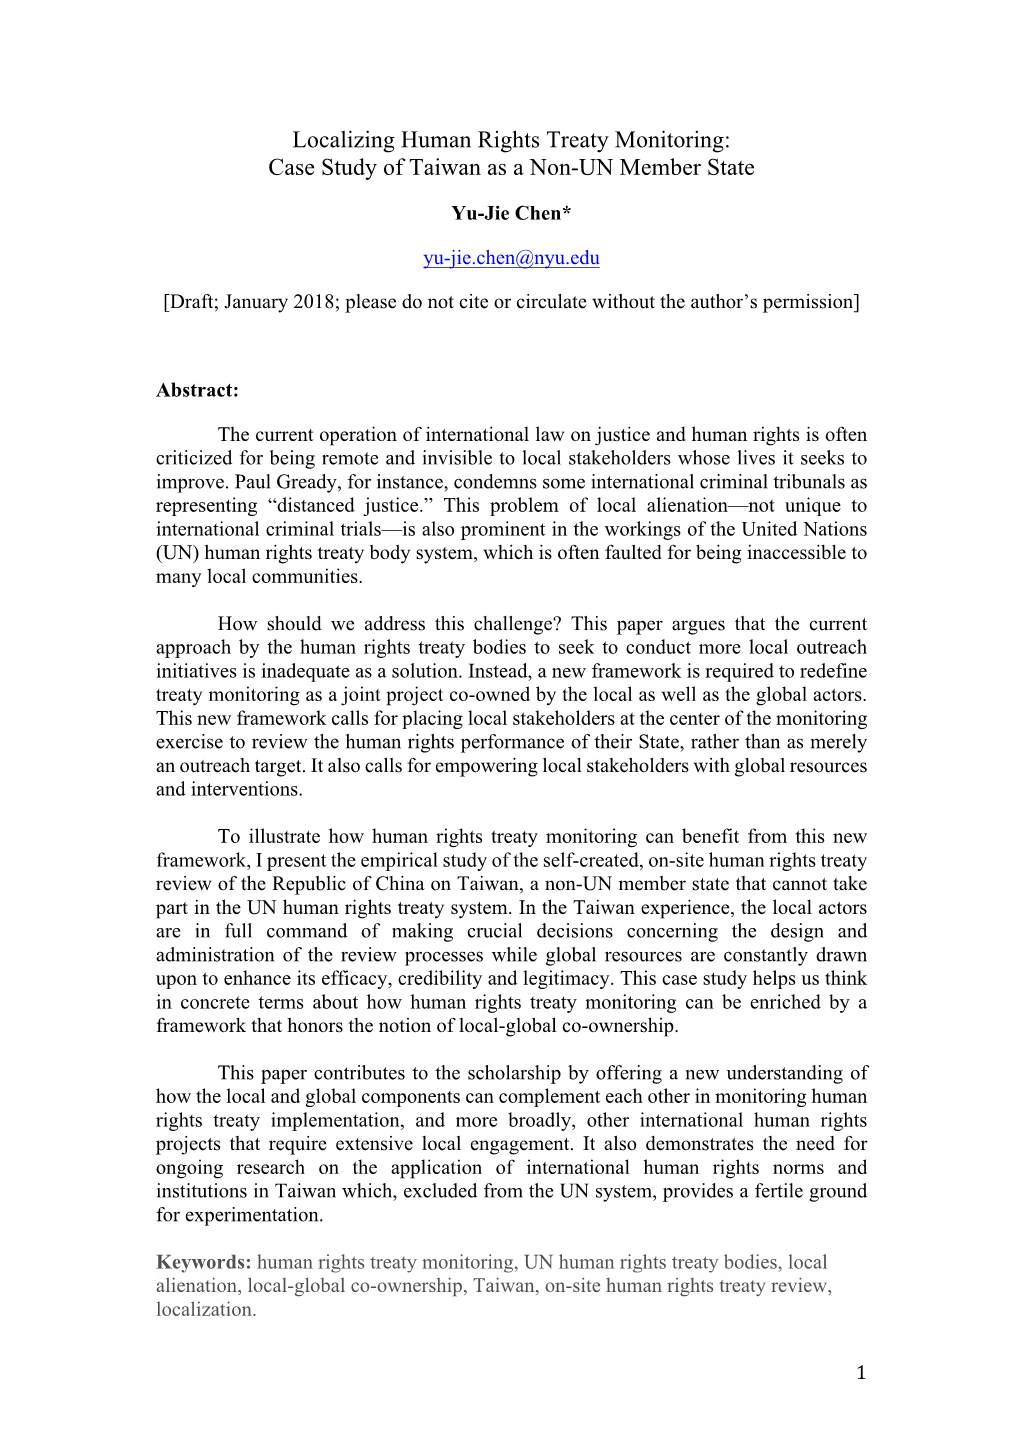 Localizing Human Rights Treaty Monitoring: Case Study of Taiwan As a Non-UN Member State